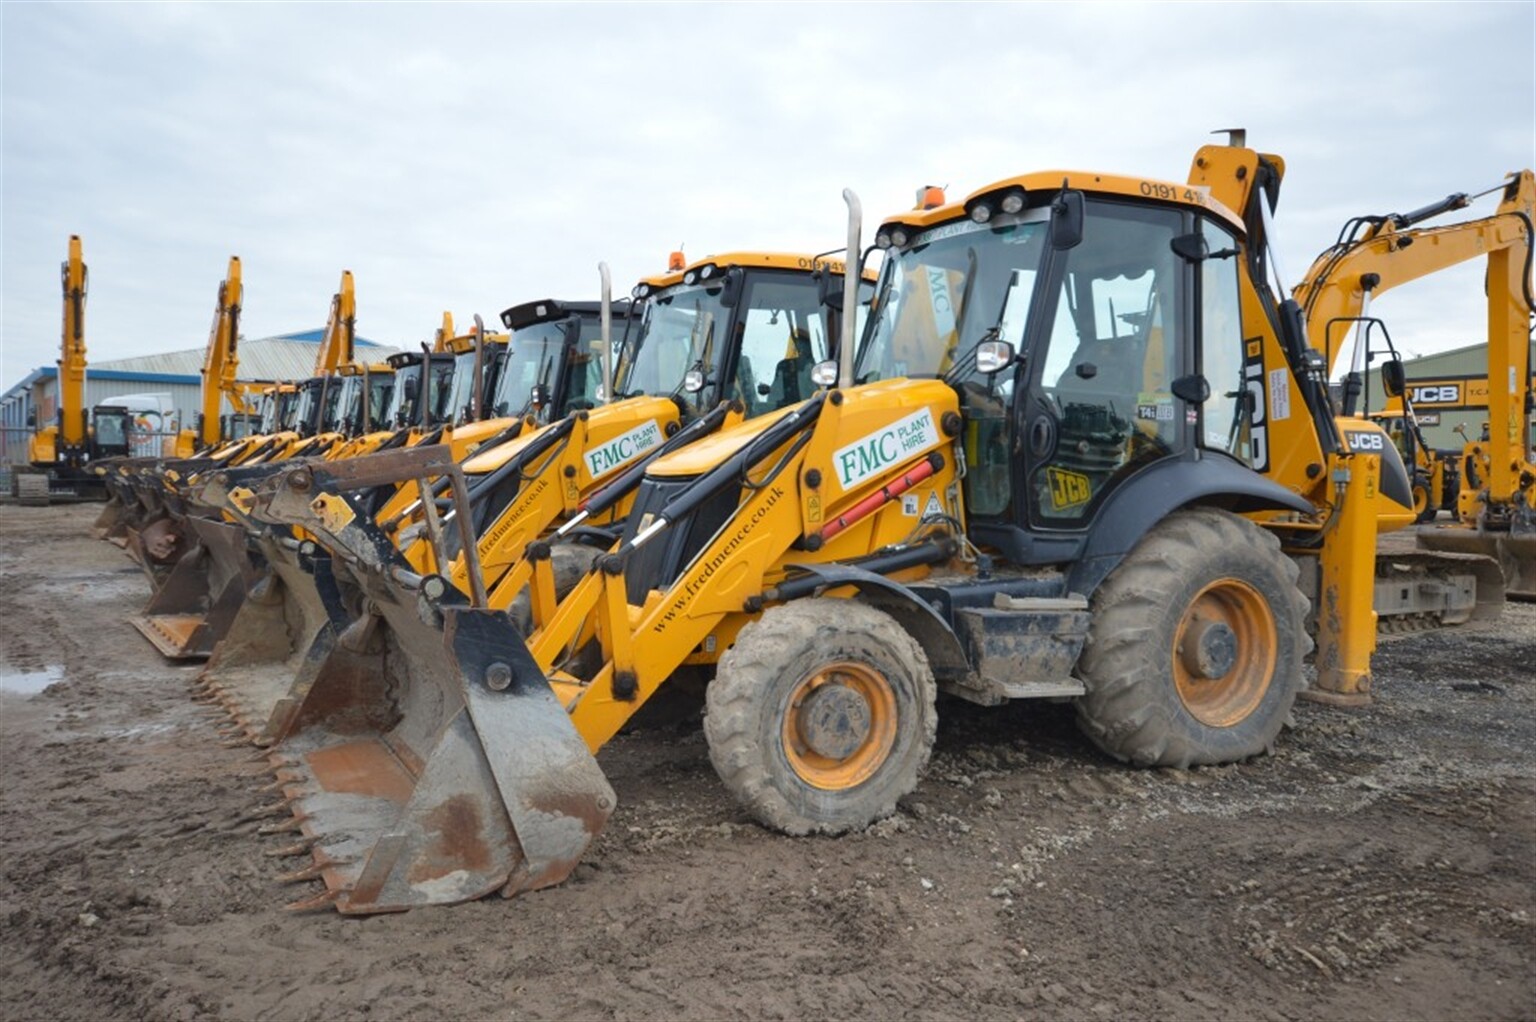 When Digger visited TC Harrison JCB Used Equipment